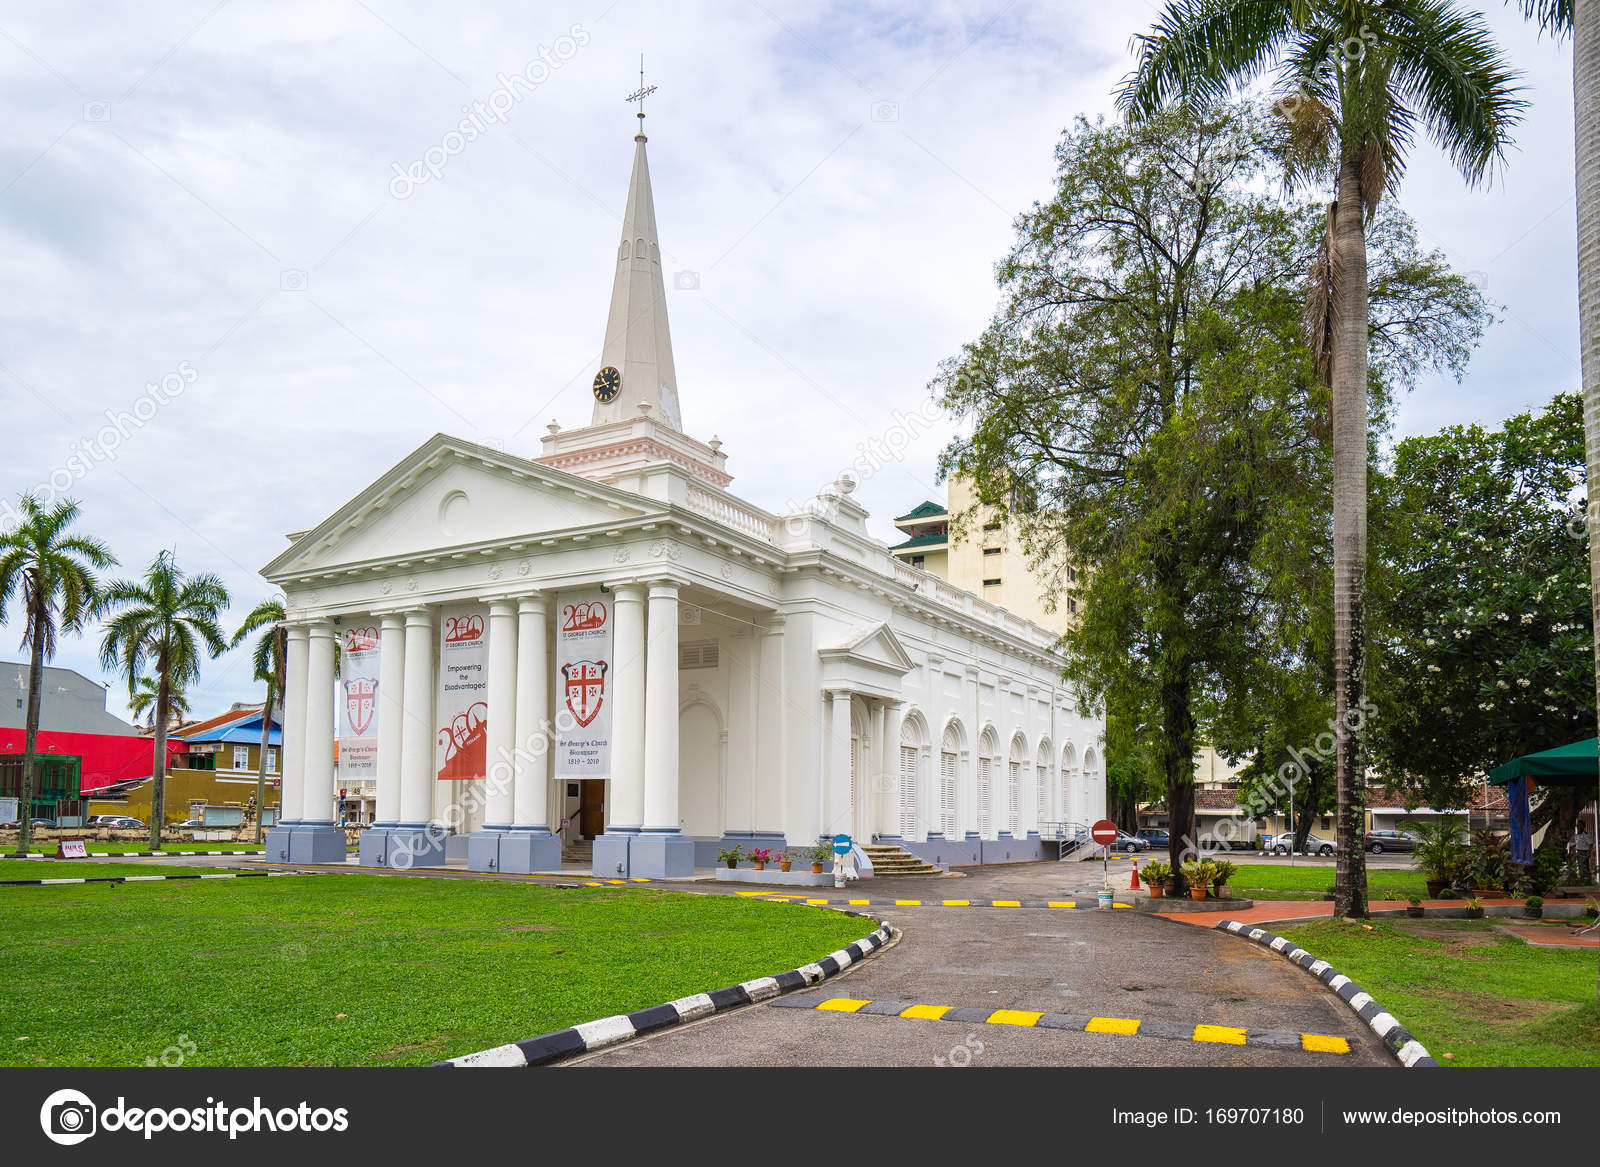 St George S Church At George Town Penang Malaysia Stock Editorial Photo C Ixuskmitl Hotmail Com 169707180